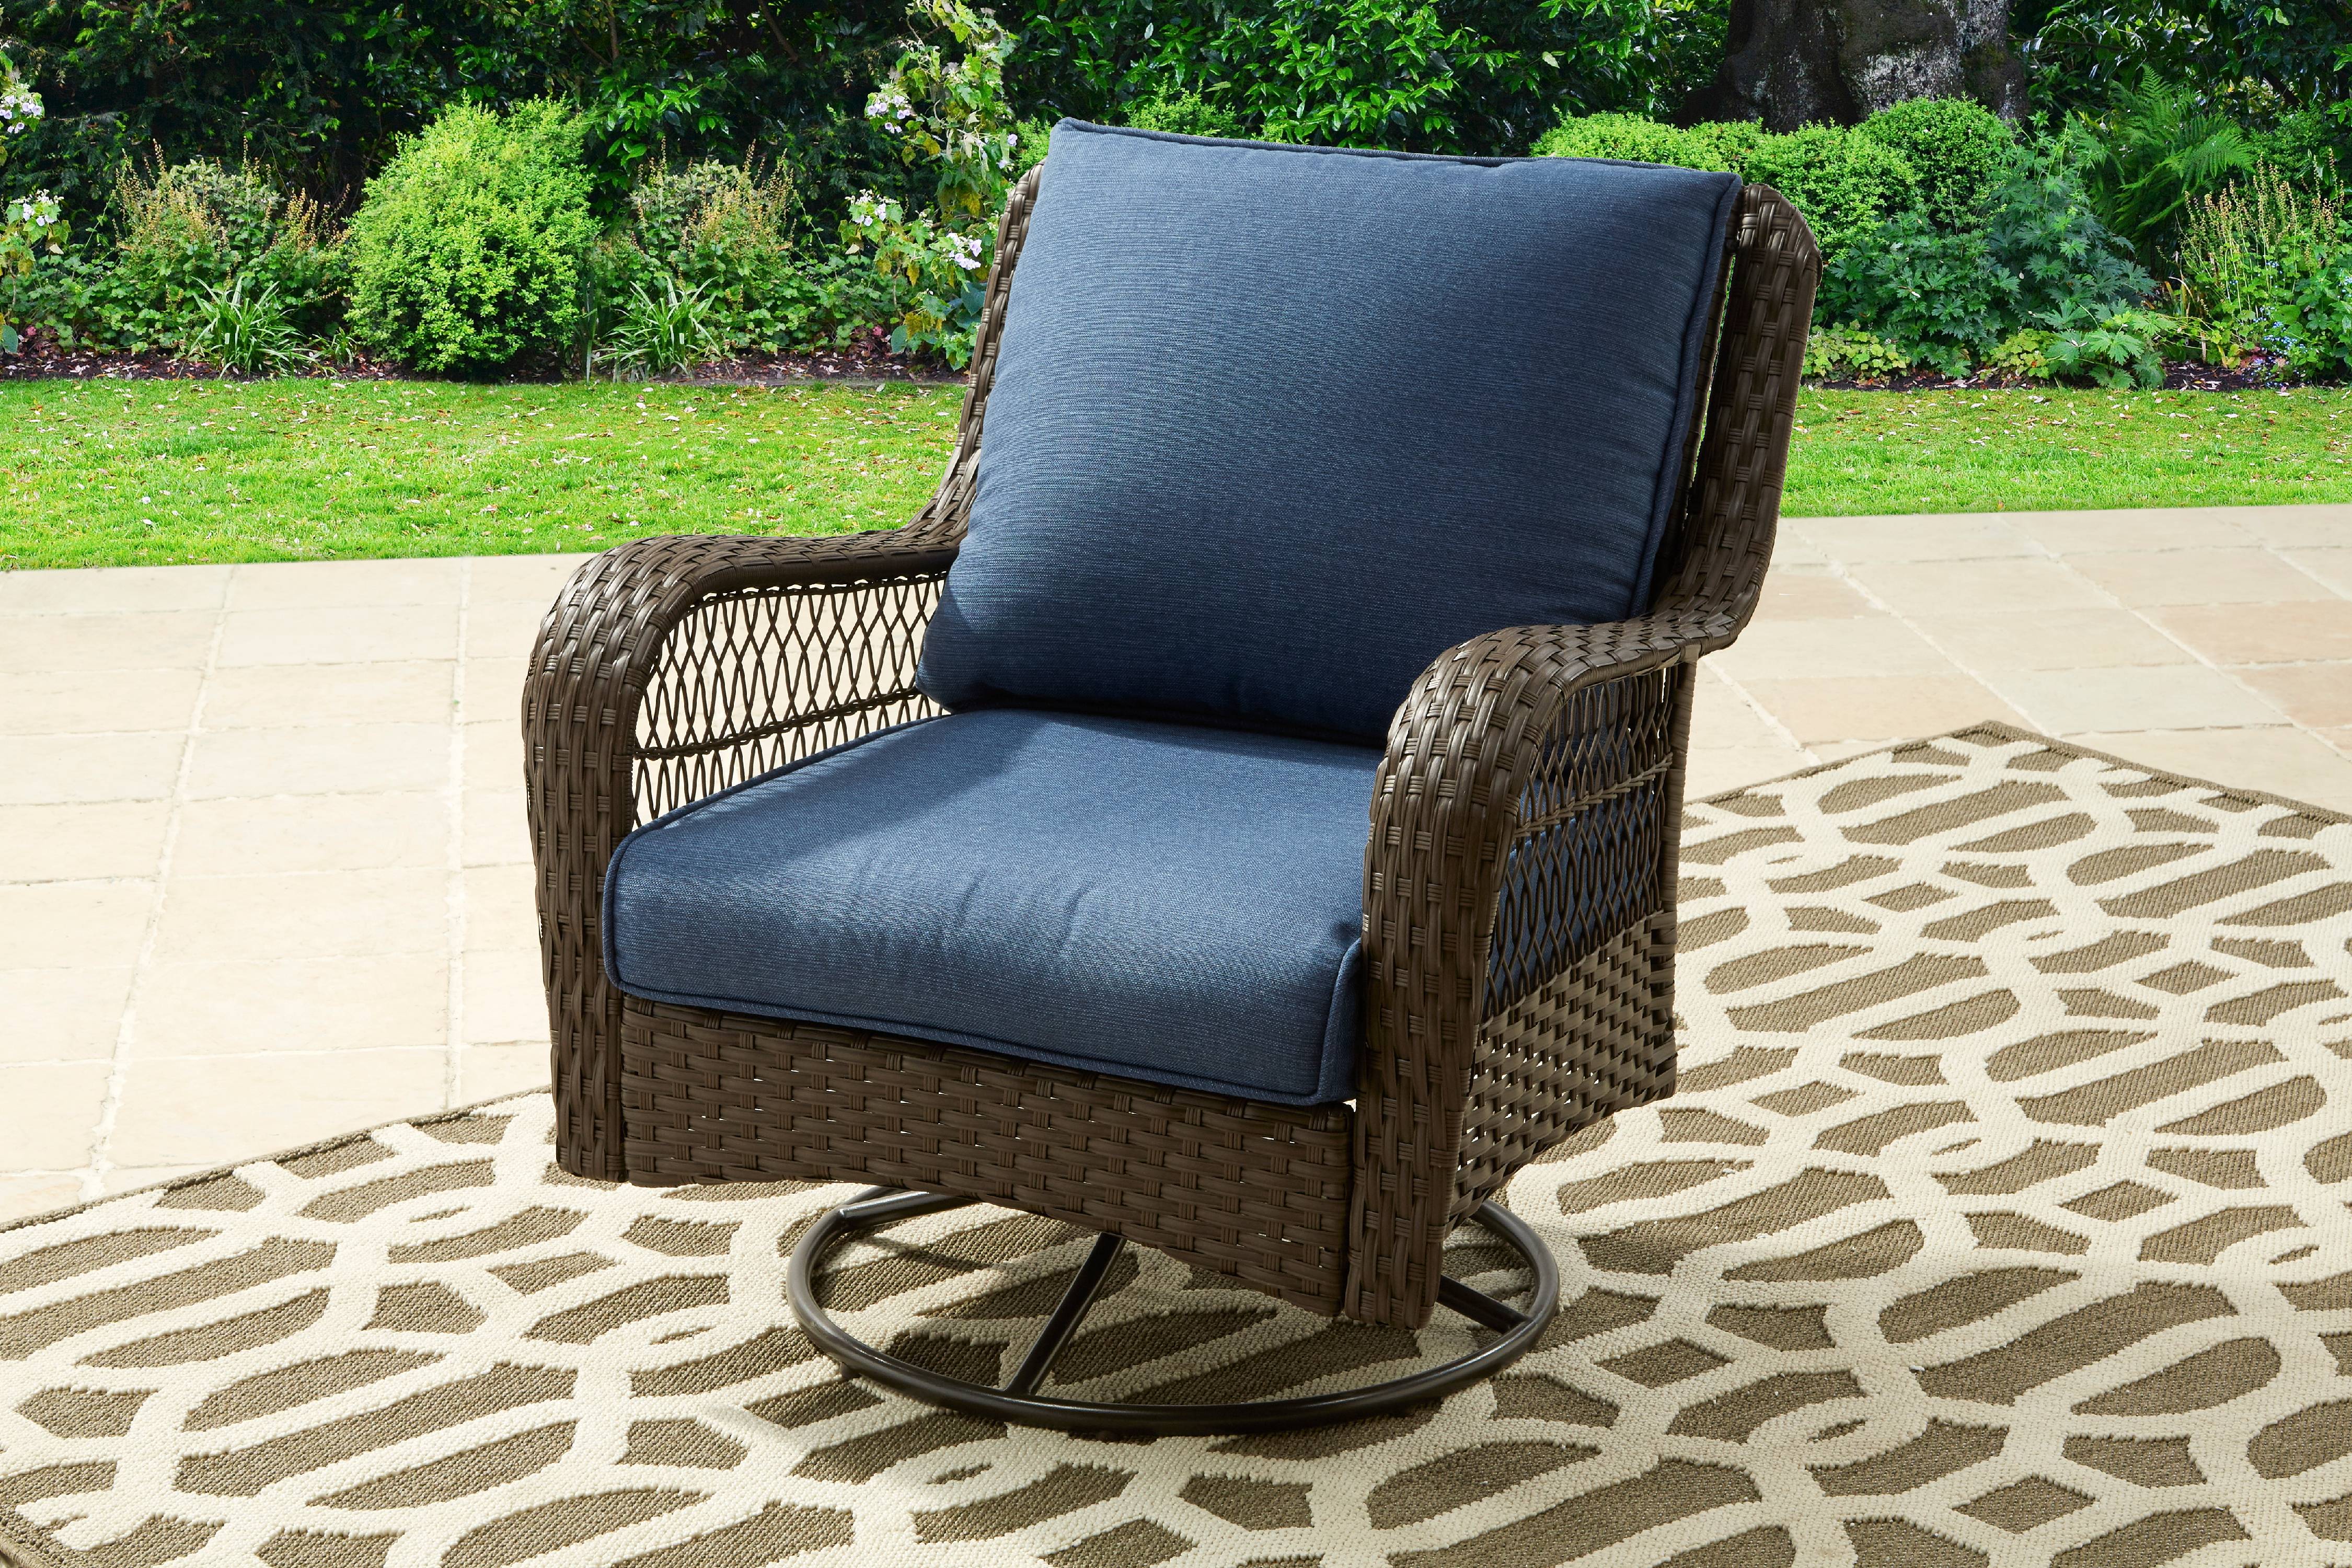 Better Homes & Gardens Colebrook 4-Piece Wicker Patio Furniture Conversation Set, with Swivel Chairs - image 3 of 15